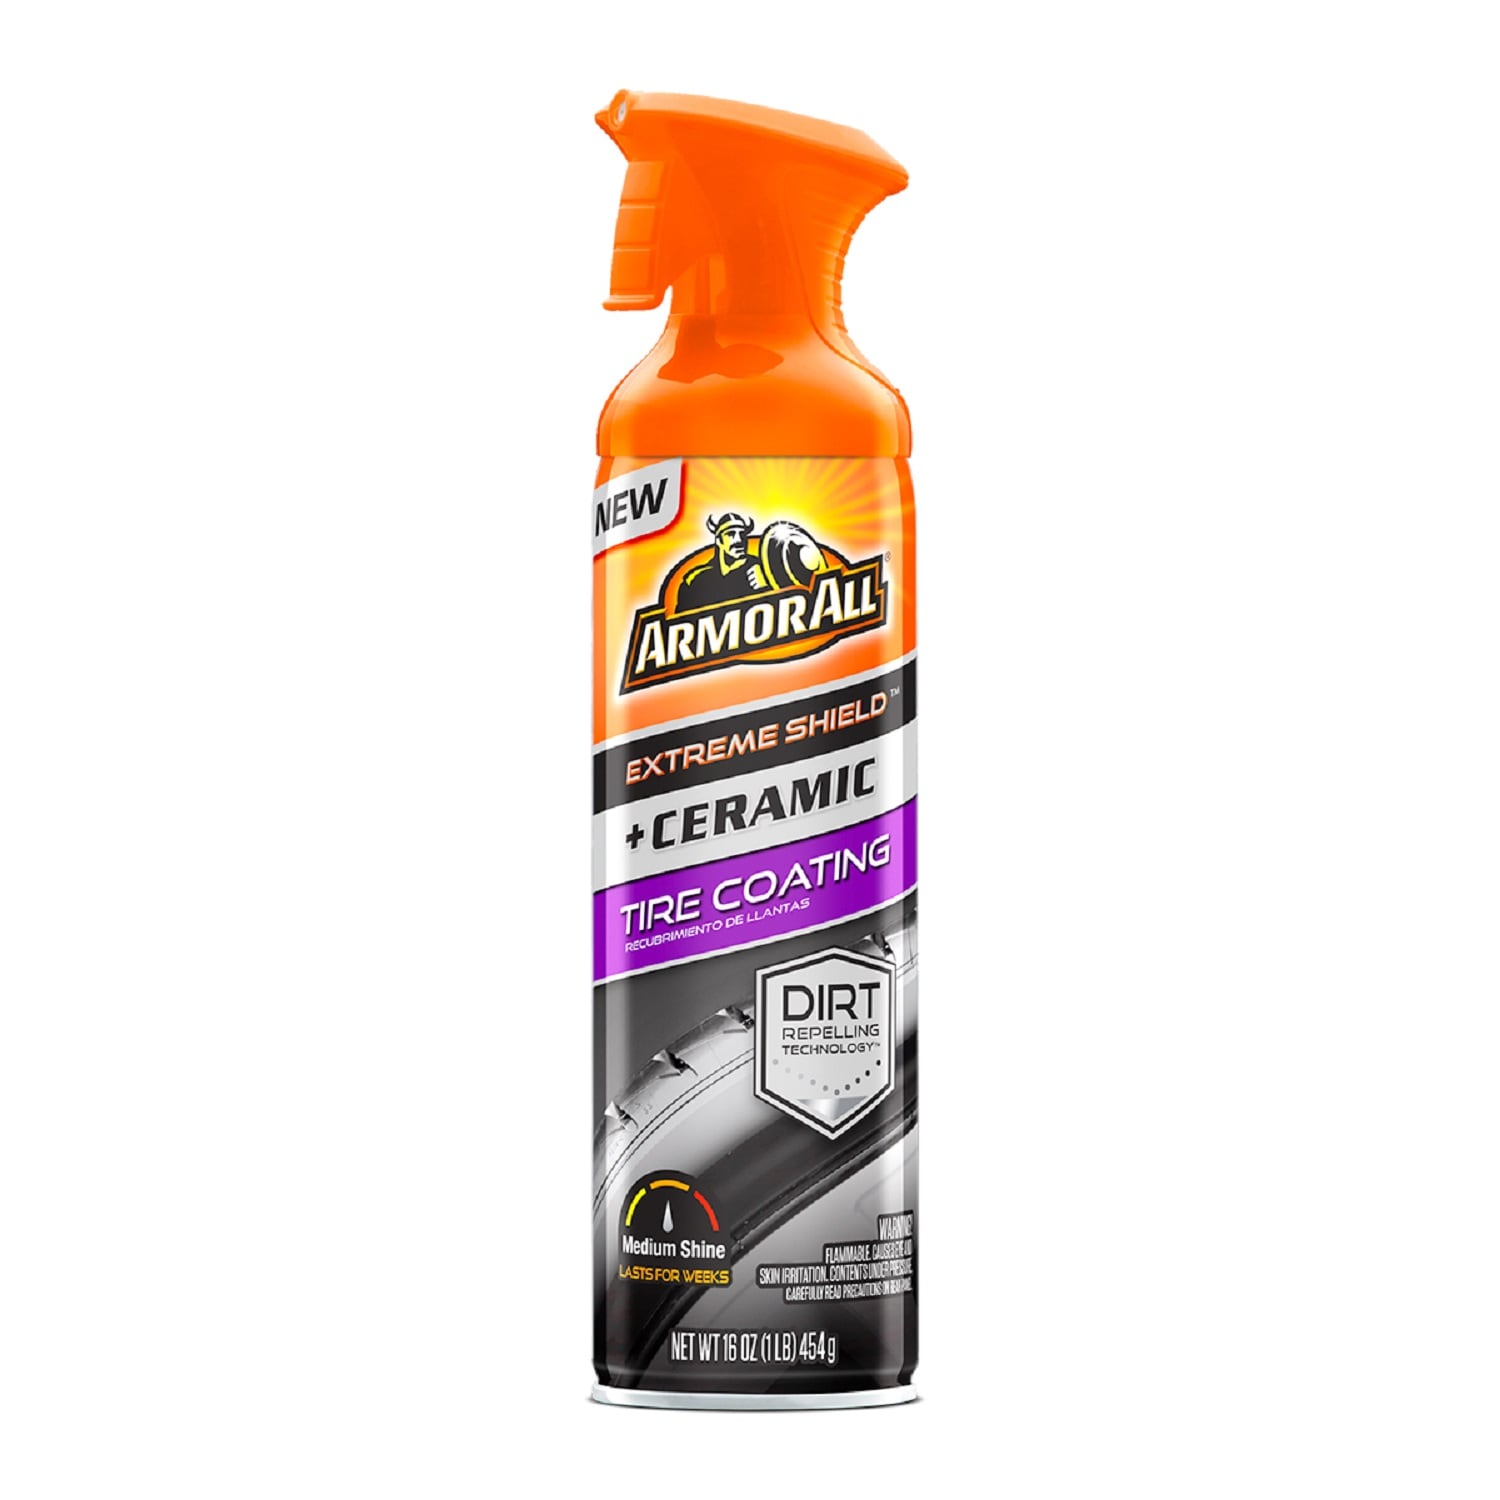 Armor All Car Wash with Extreme Shield and Ceramic technology, 50